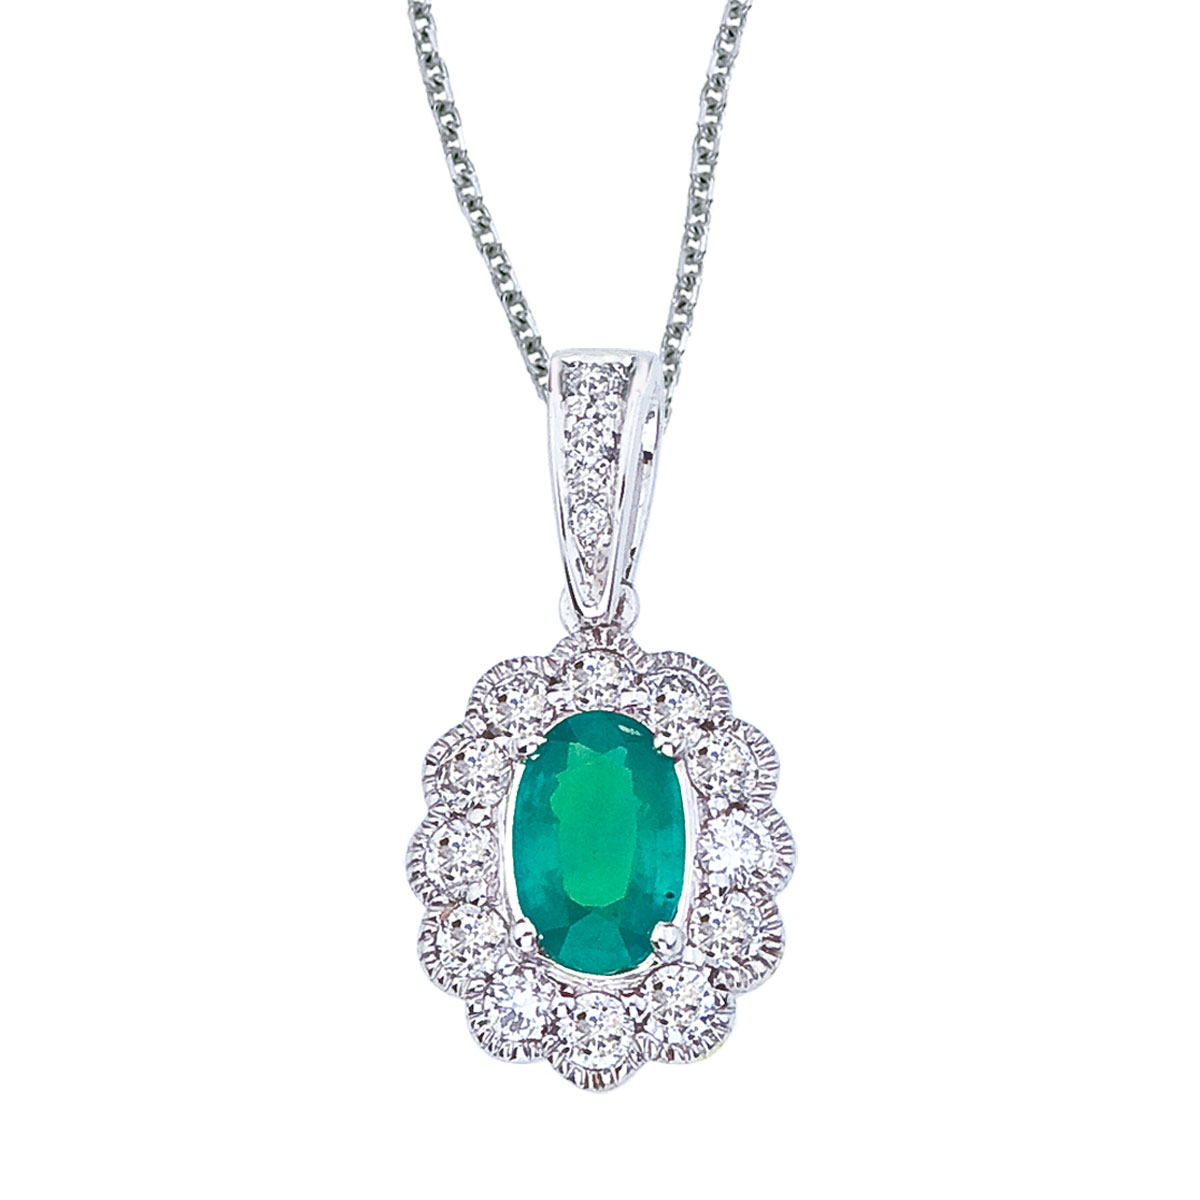 JCX2575: This beautiful 14k white gold pendant features a bright 6x4 mm emerald with .30 total ct diamonds.